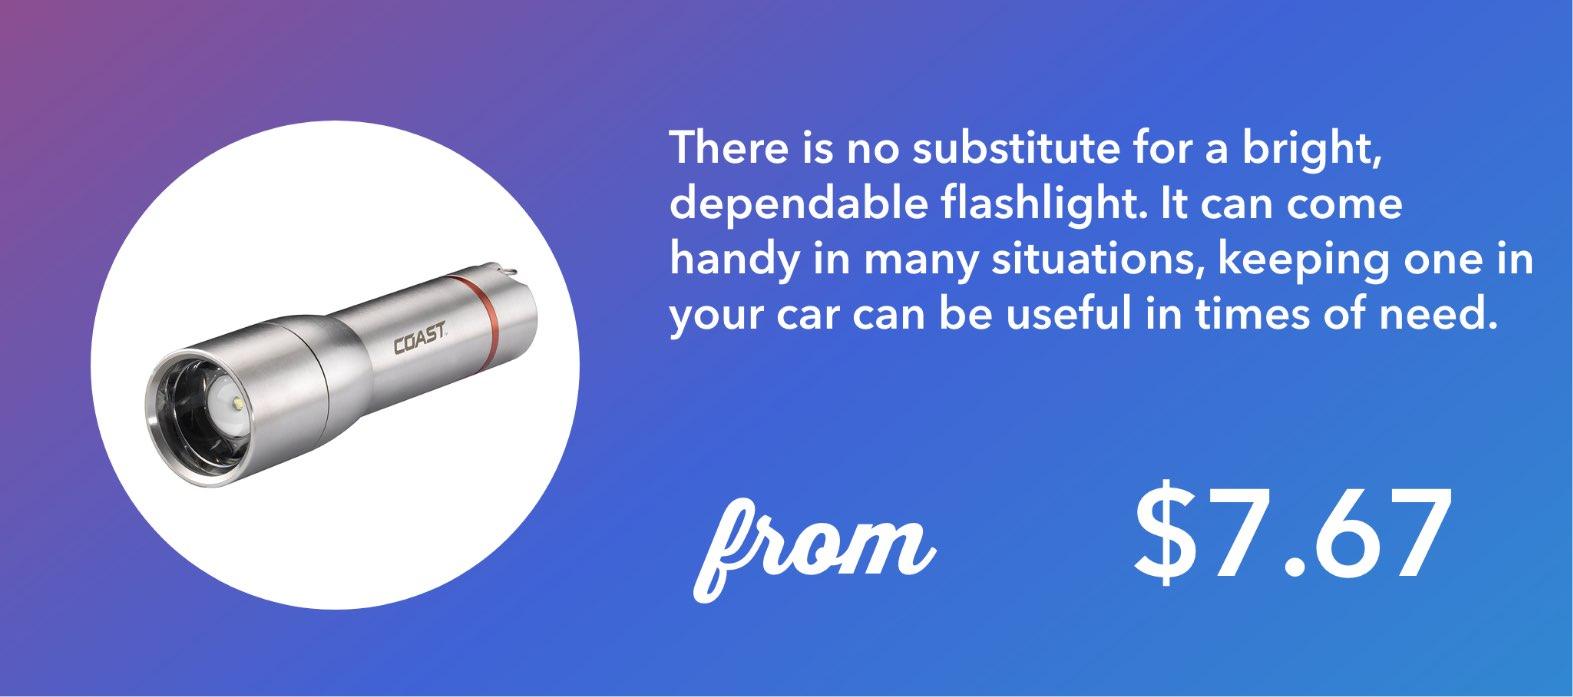 There is no substitute for a bright, dependable flashlight. It can come handy in many situations, keeping one in your car can be useful in times of need.